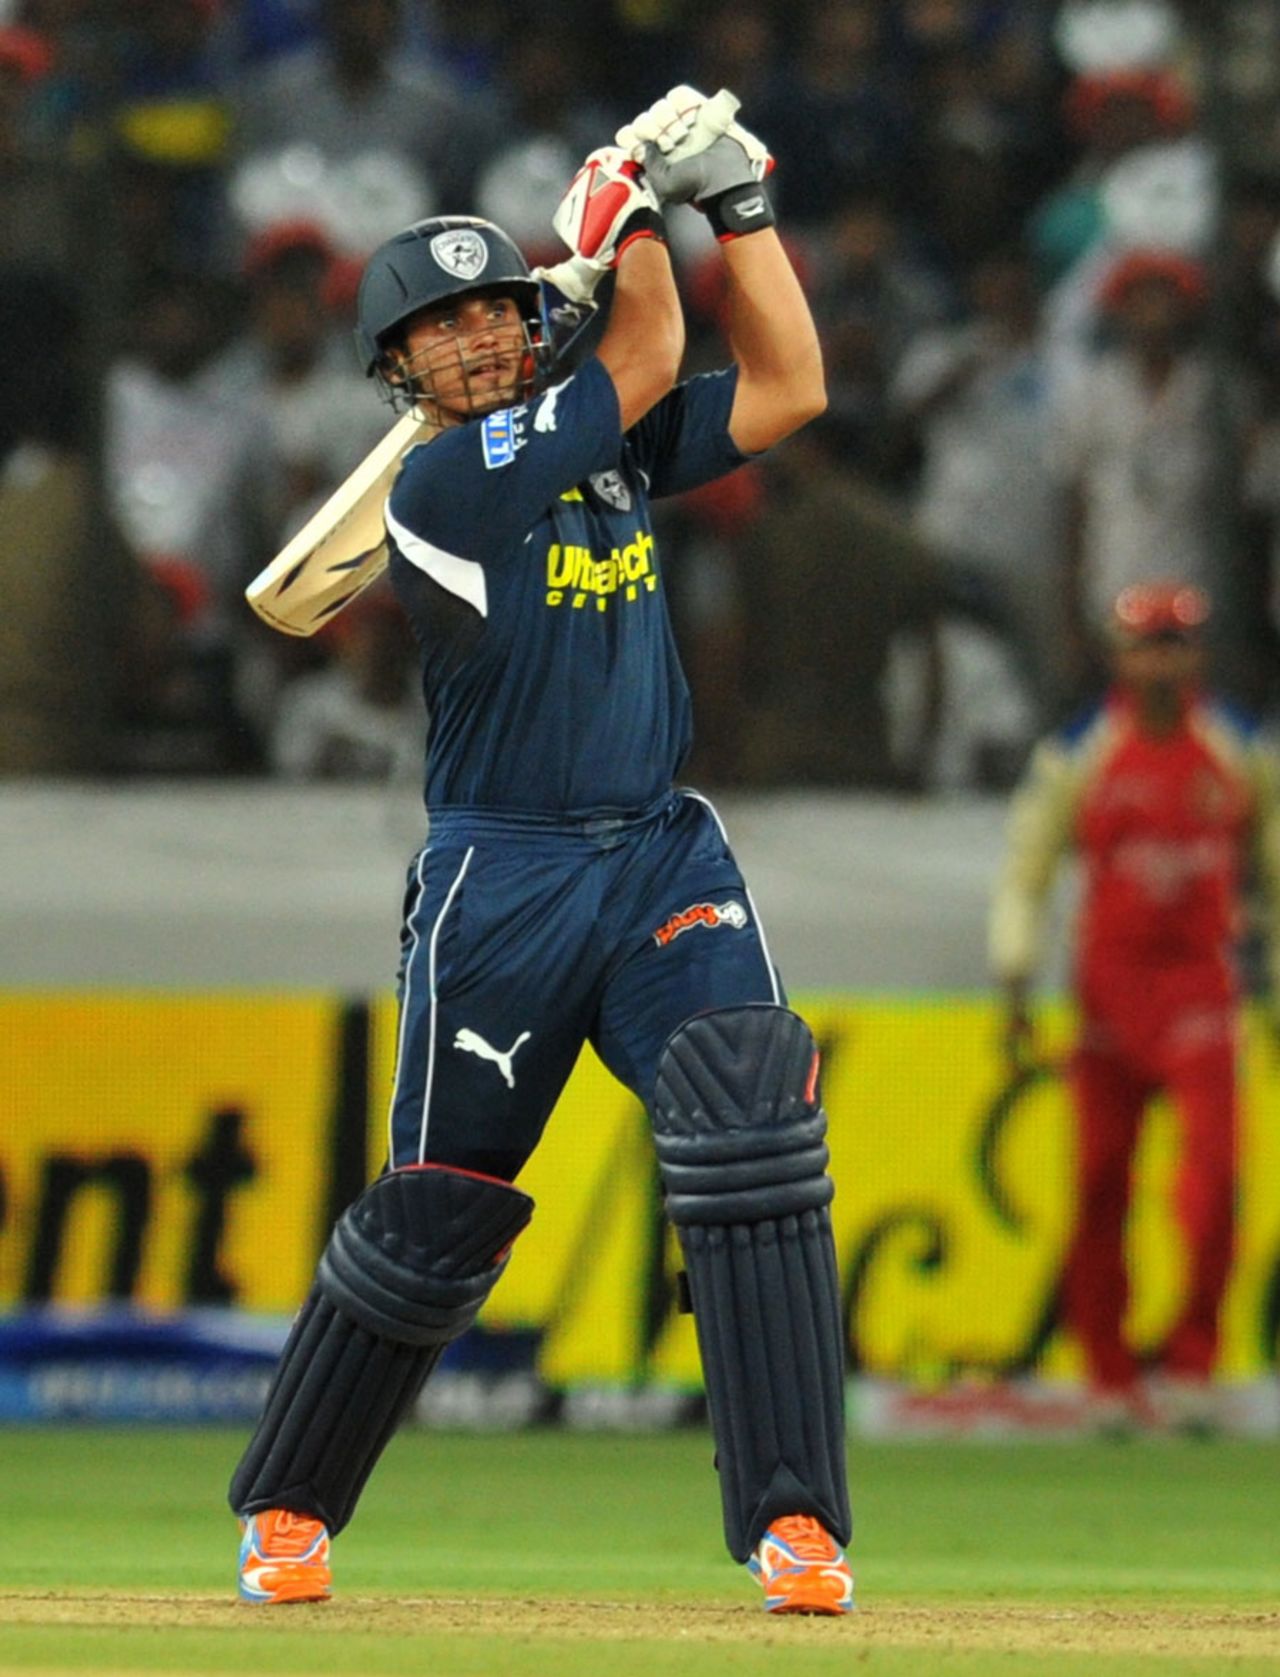 Bharat Chipli lifted Deccan Chargers to a hefty total of 175, Deccan Chargers v Royal Challengers Bangalore, IPL 2011, Hyderabad, April 14, 2011